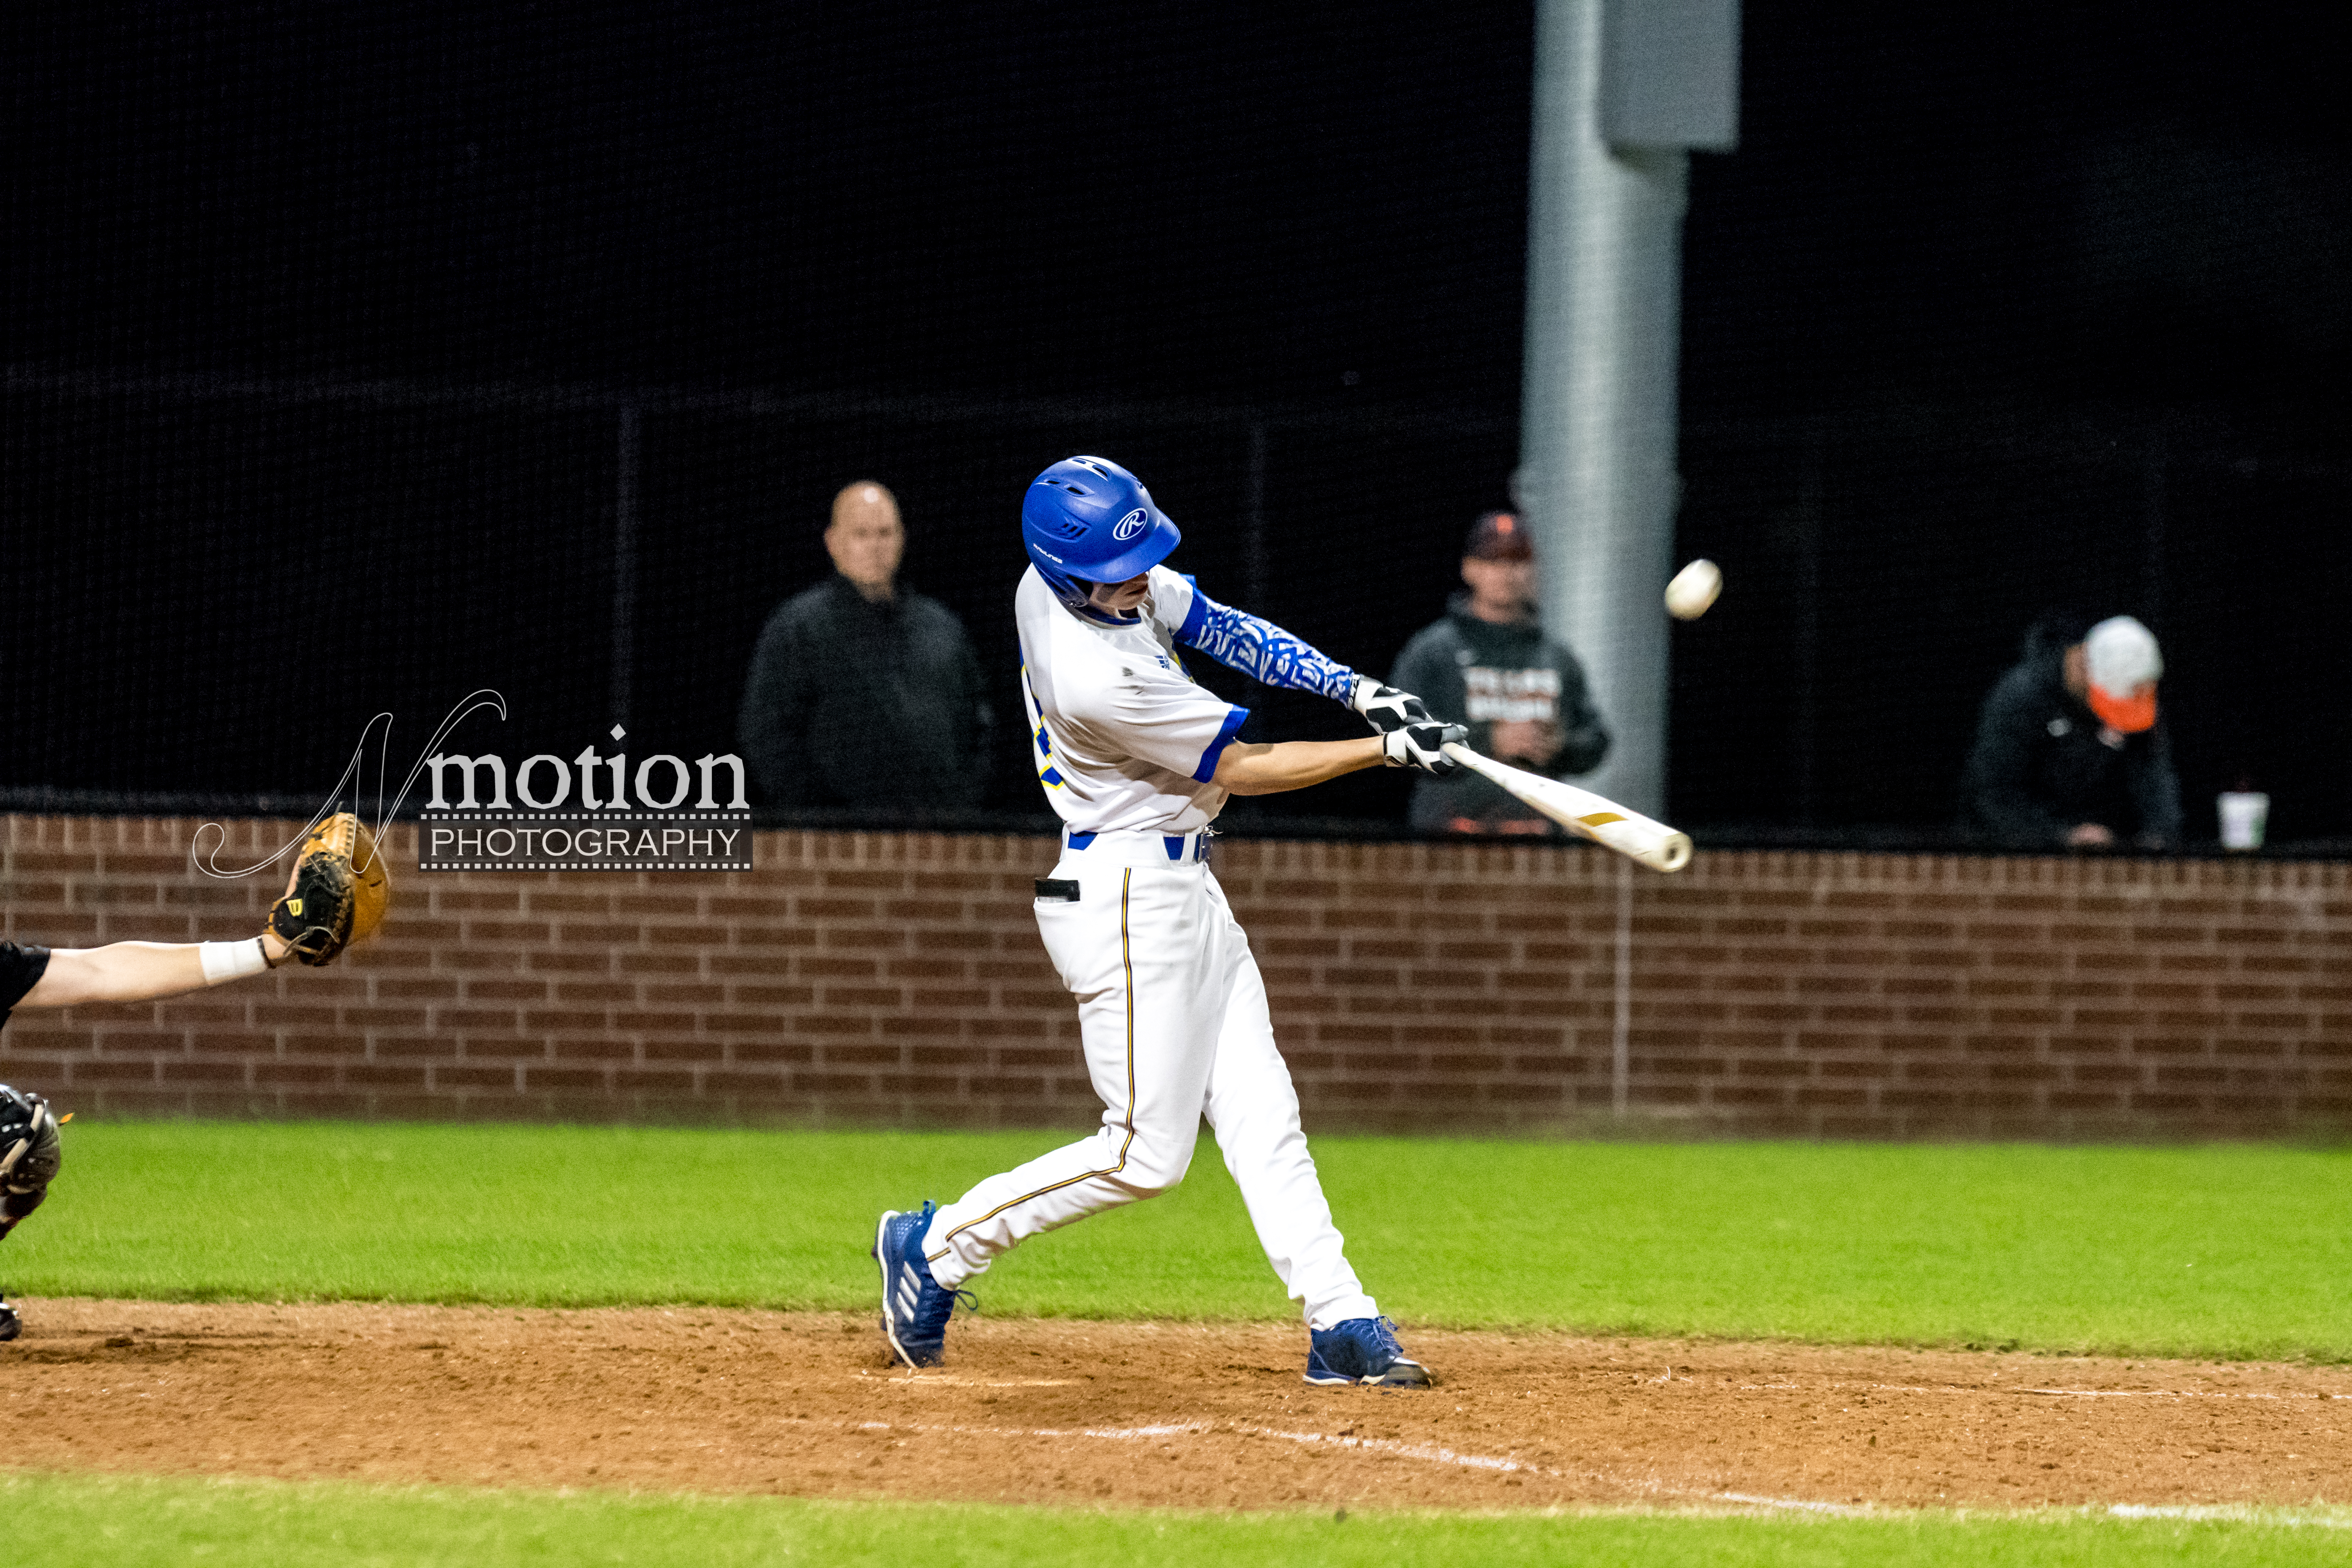 Photos from Sulphur Springs Baseball’s 6-4 Extra Innings Loss to Texas High by Cathy Bryan of Nmotion Photography